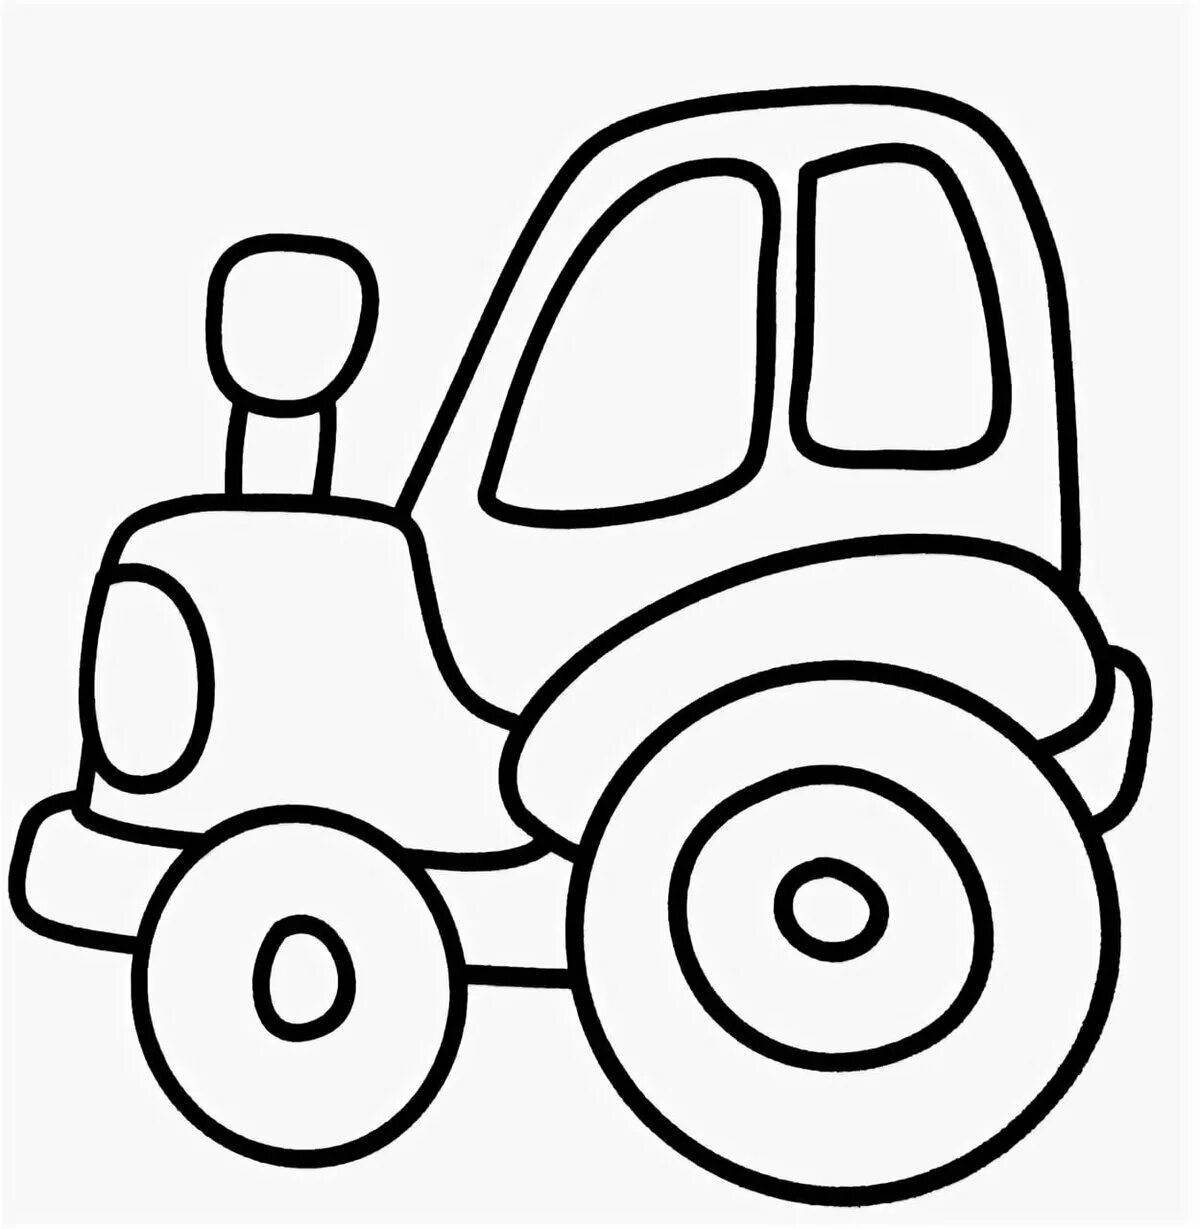 Coloring for cars with imagination for kids 2-3 years old